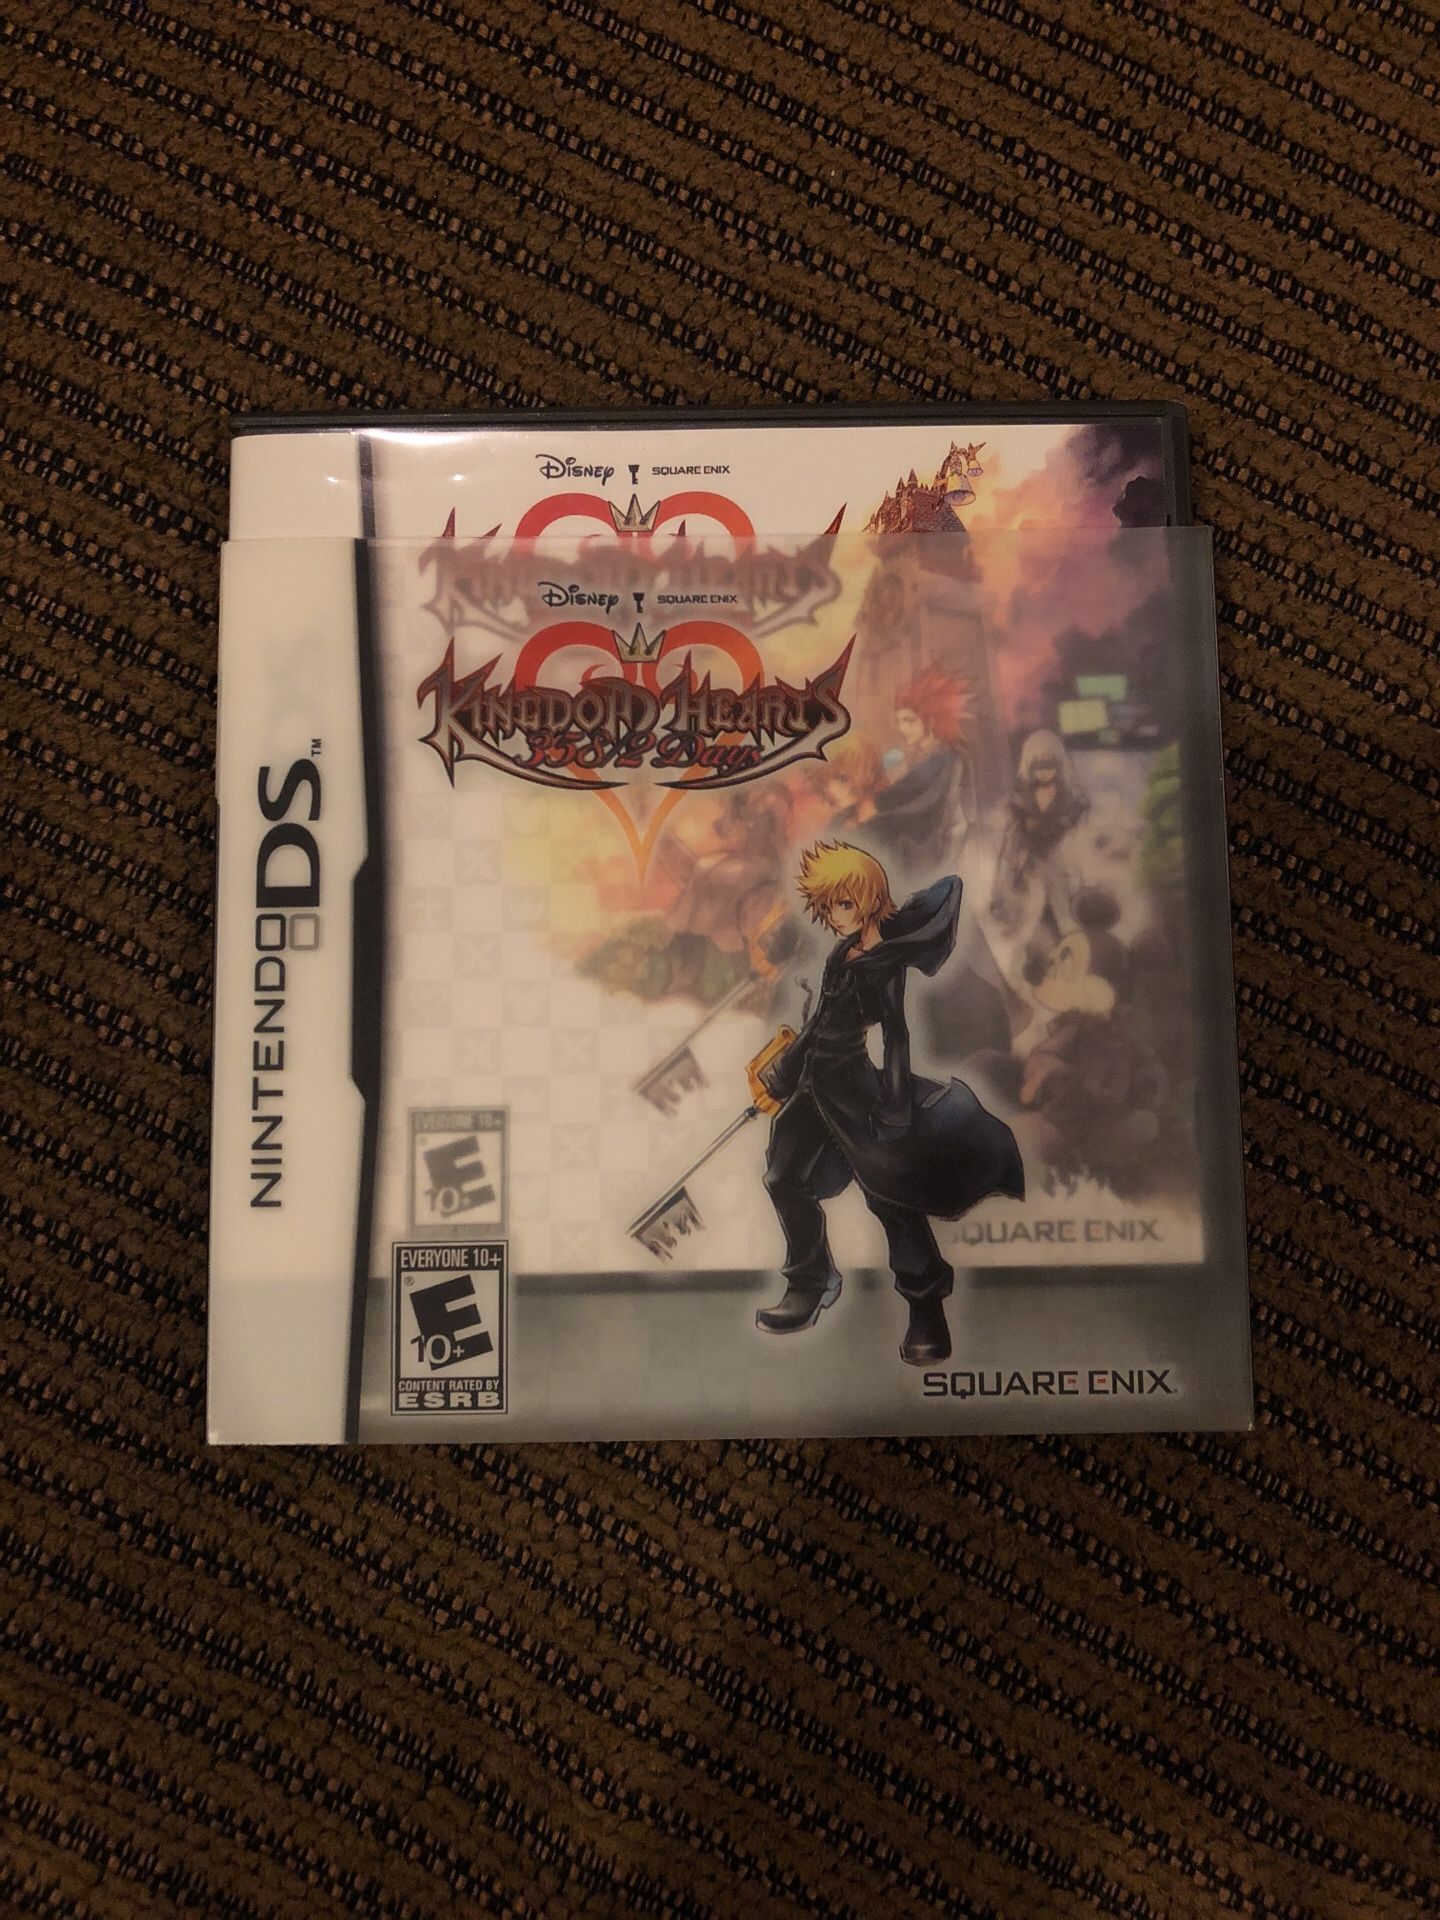 Kingdom Hearts 358/2 Days for Nintendo DS (3DS family compatible)